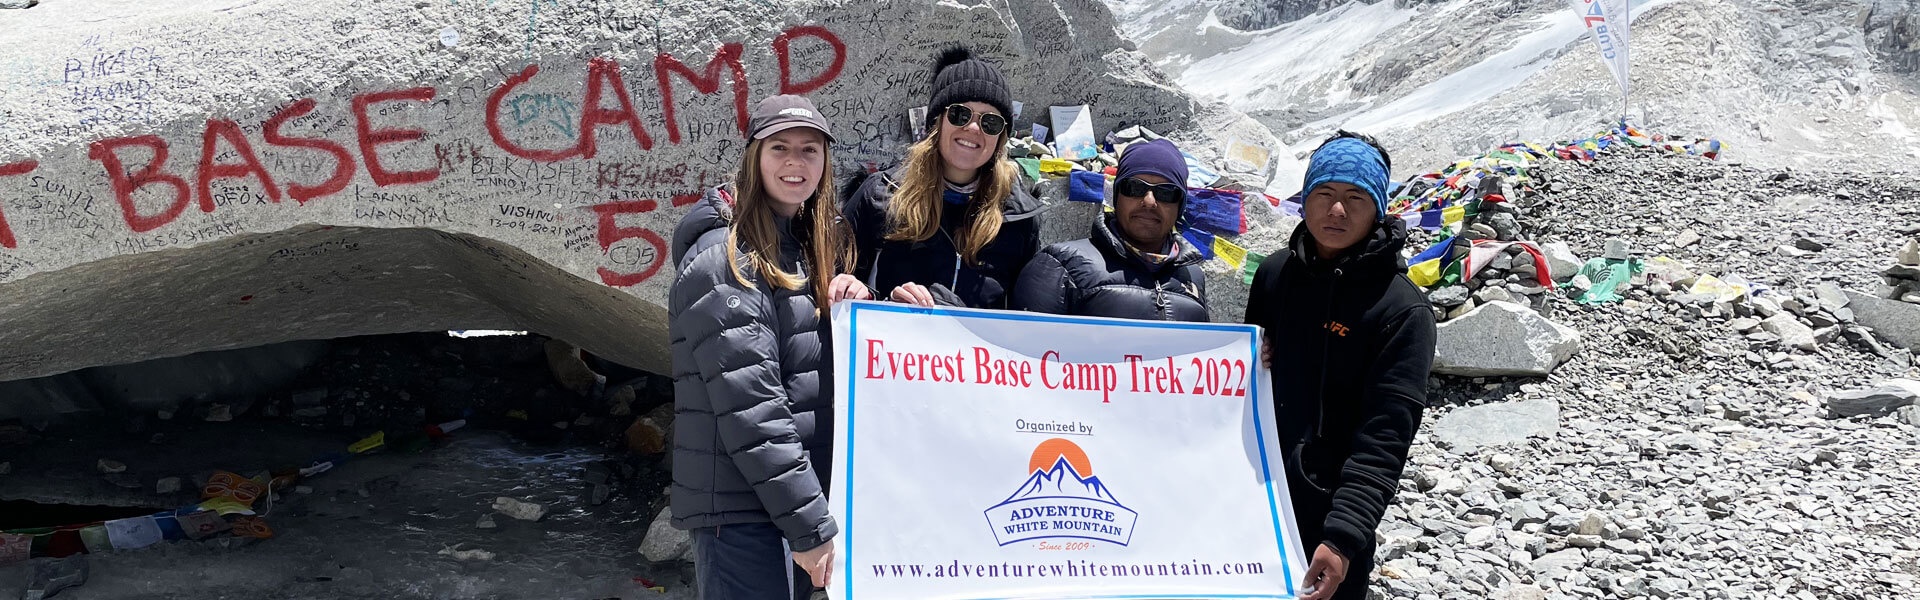 Everest Base Camp Trek Cost and Itinerary